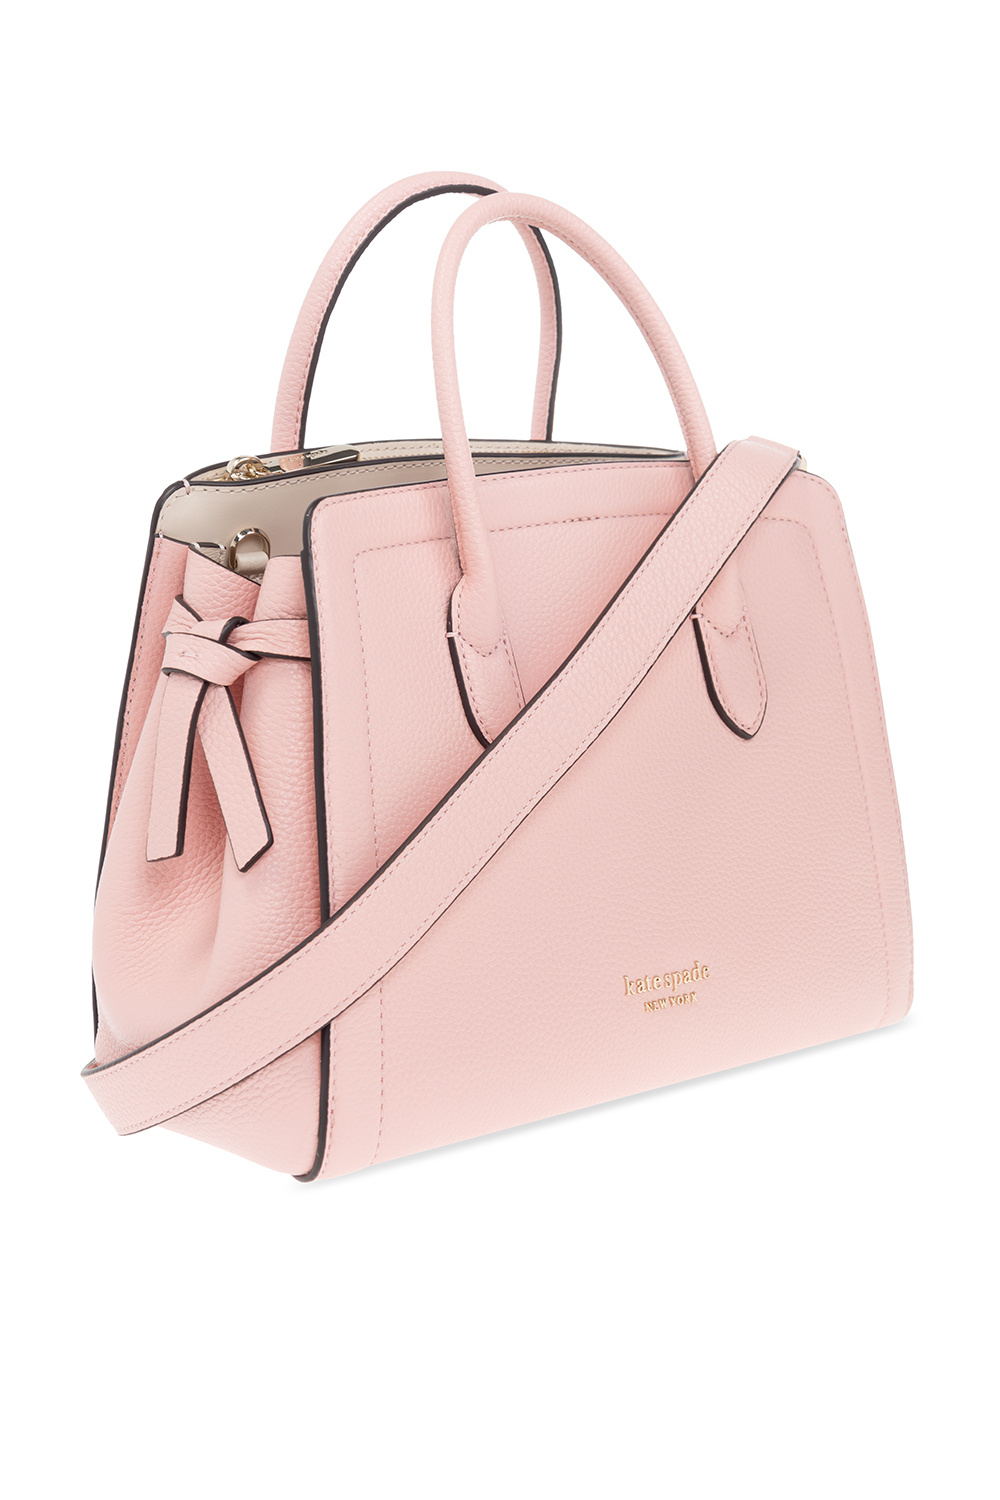 Kate Spade Knott Large Satchel, Coral Gable in 2023